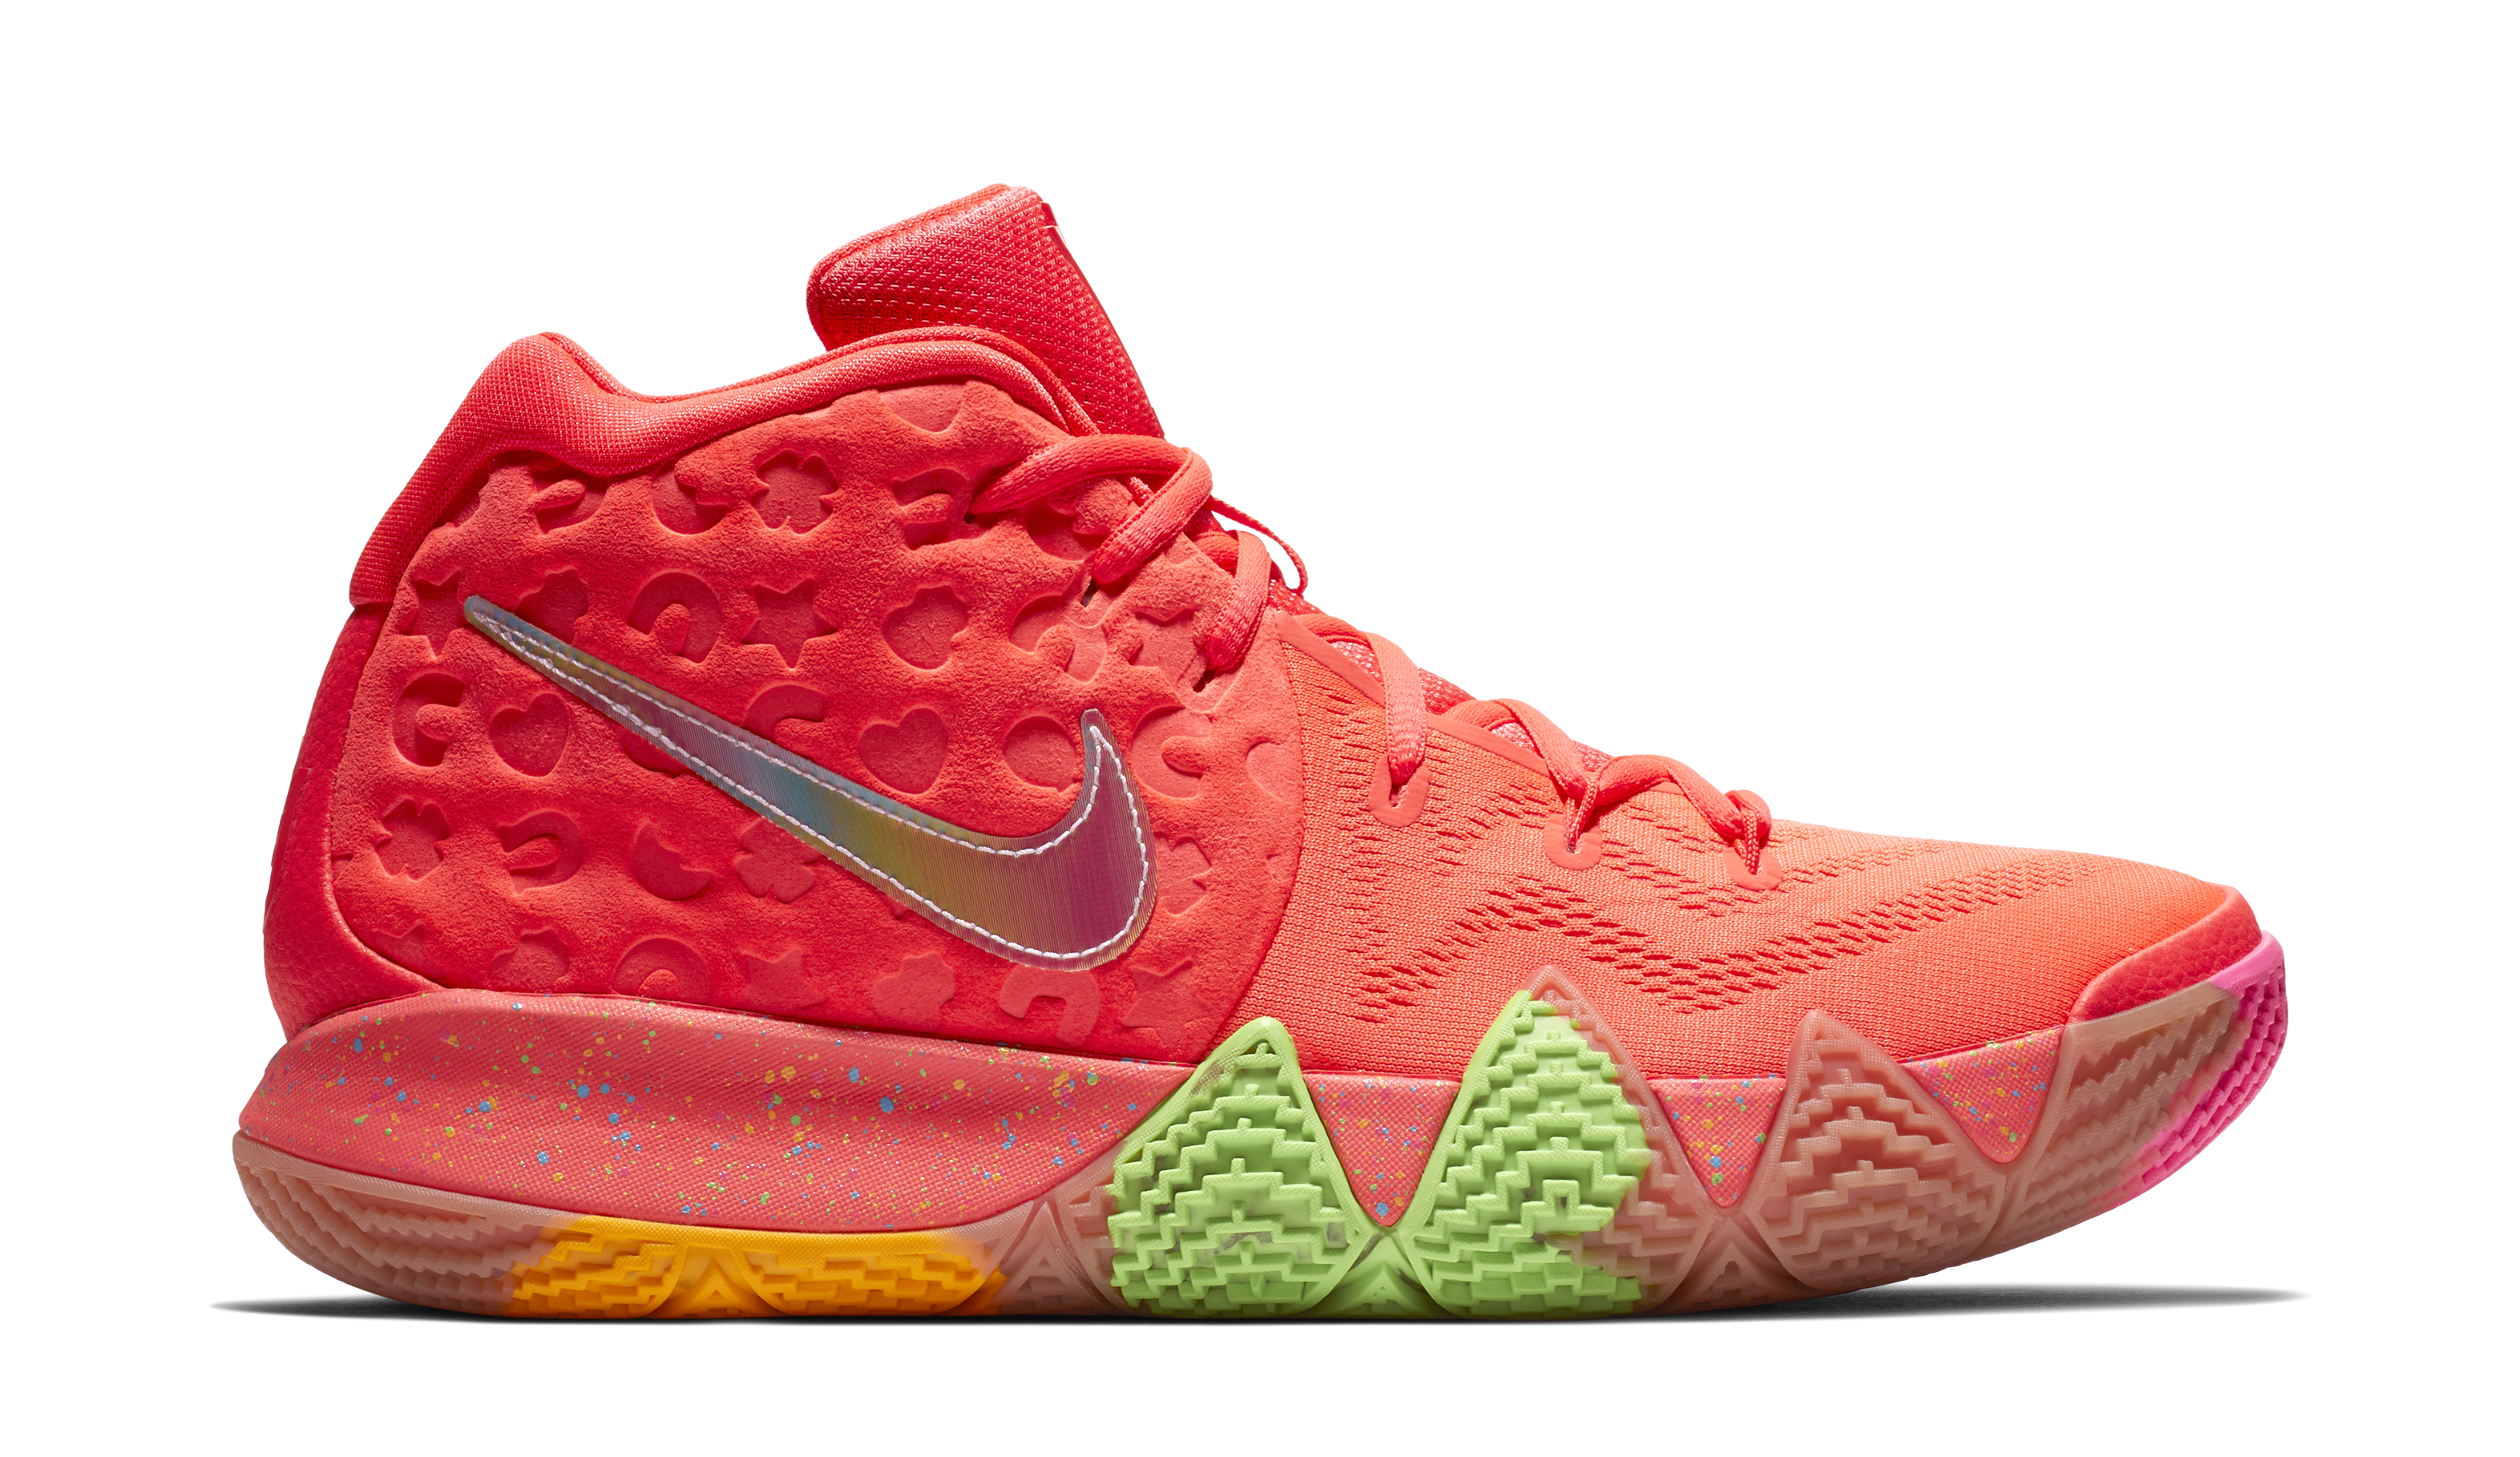 Nike Kyrie 4 &#x27;Lucky Charms&#x27; BV0428-600 (Lateral)